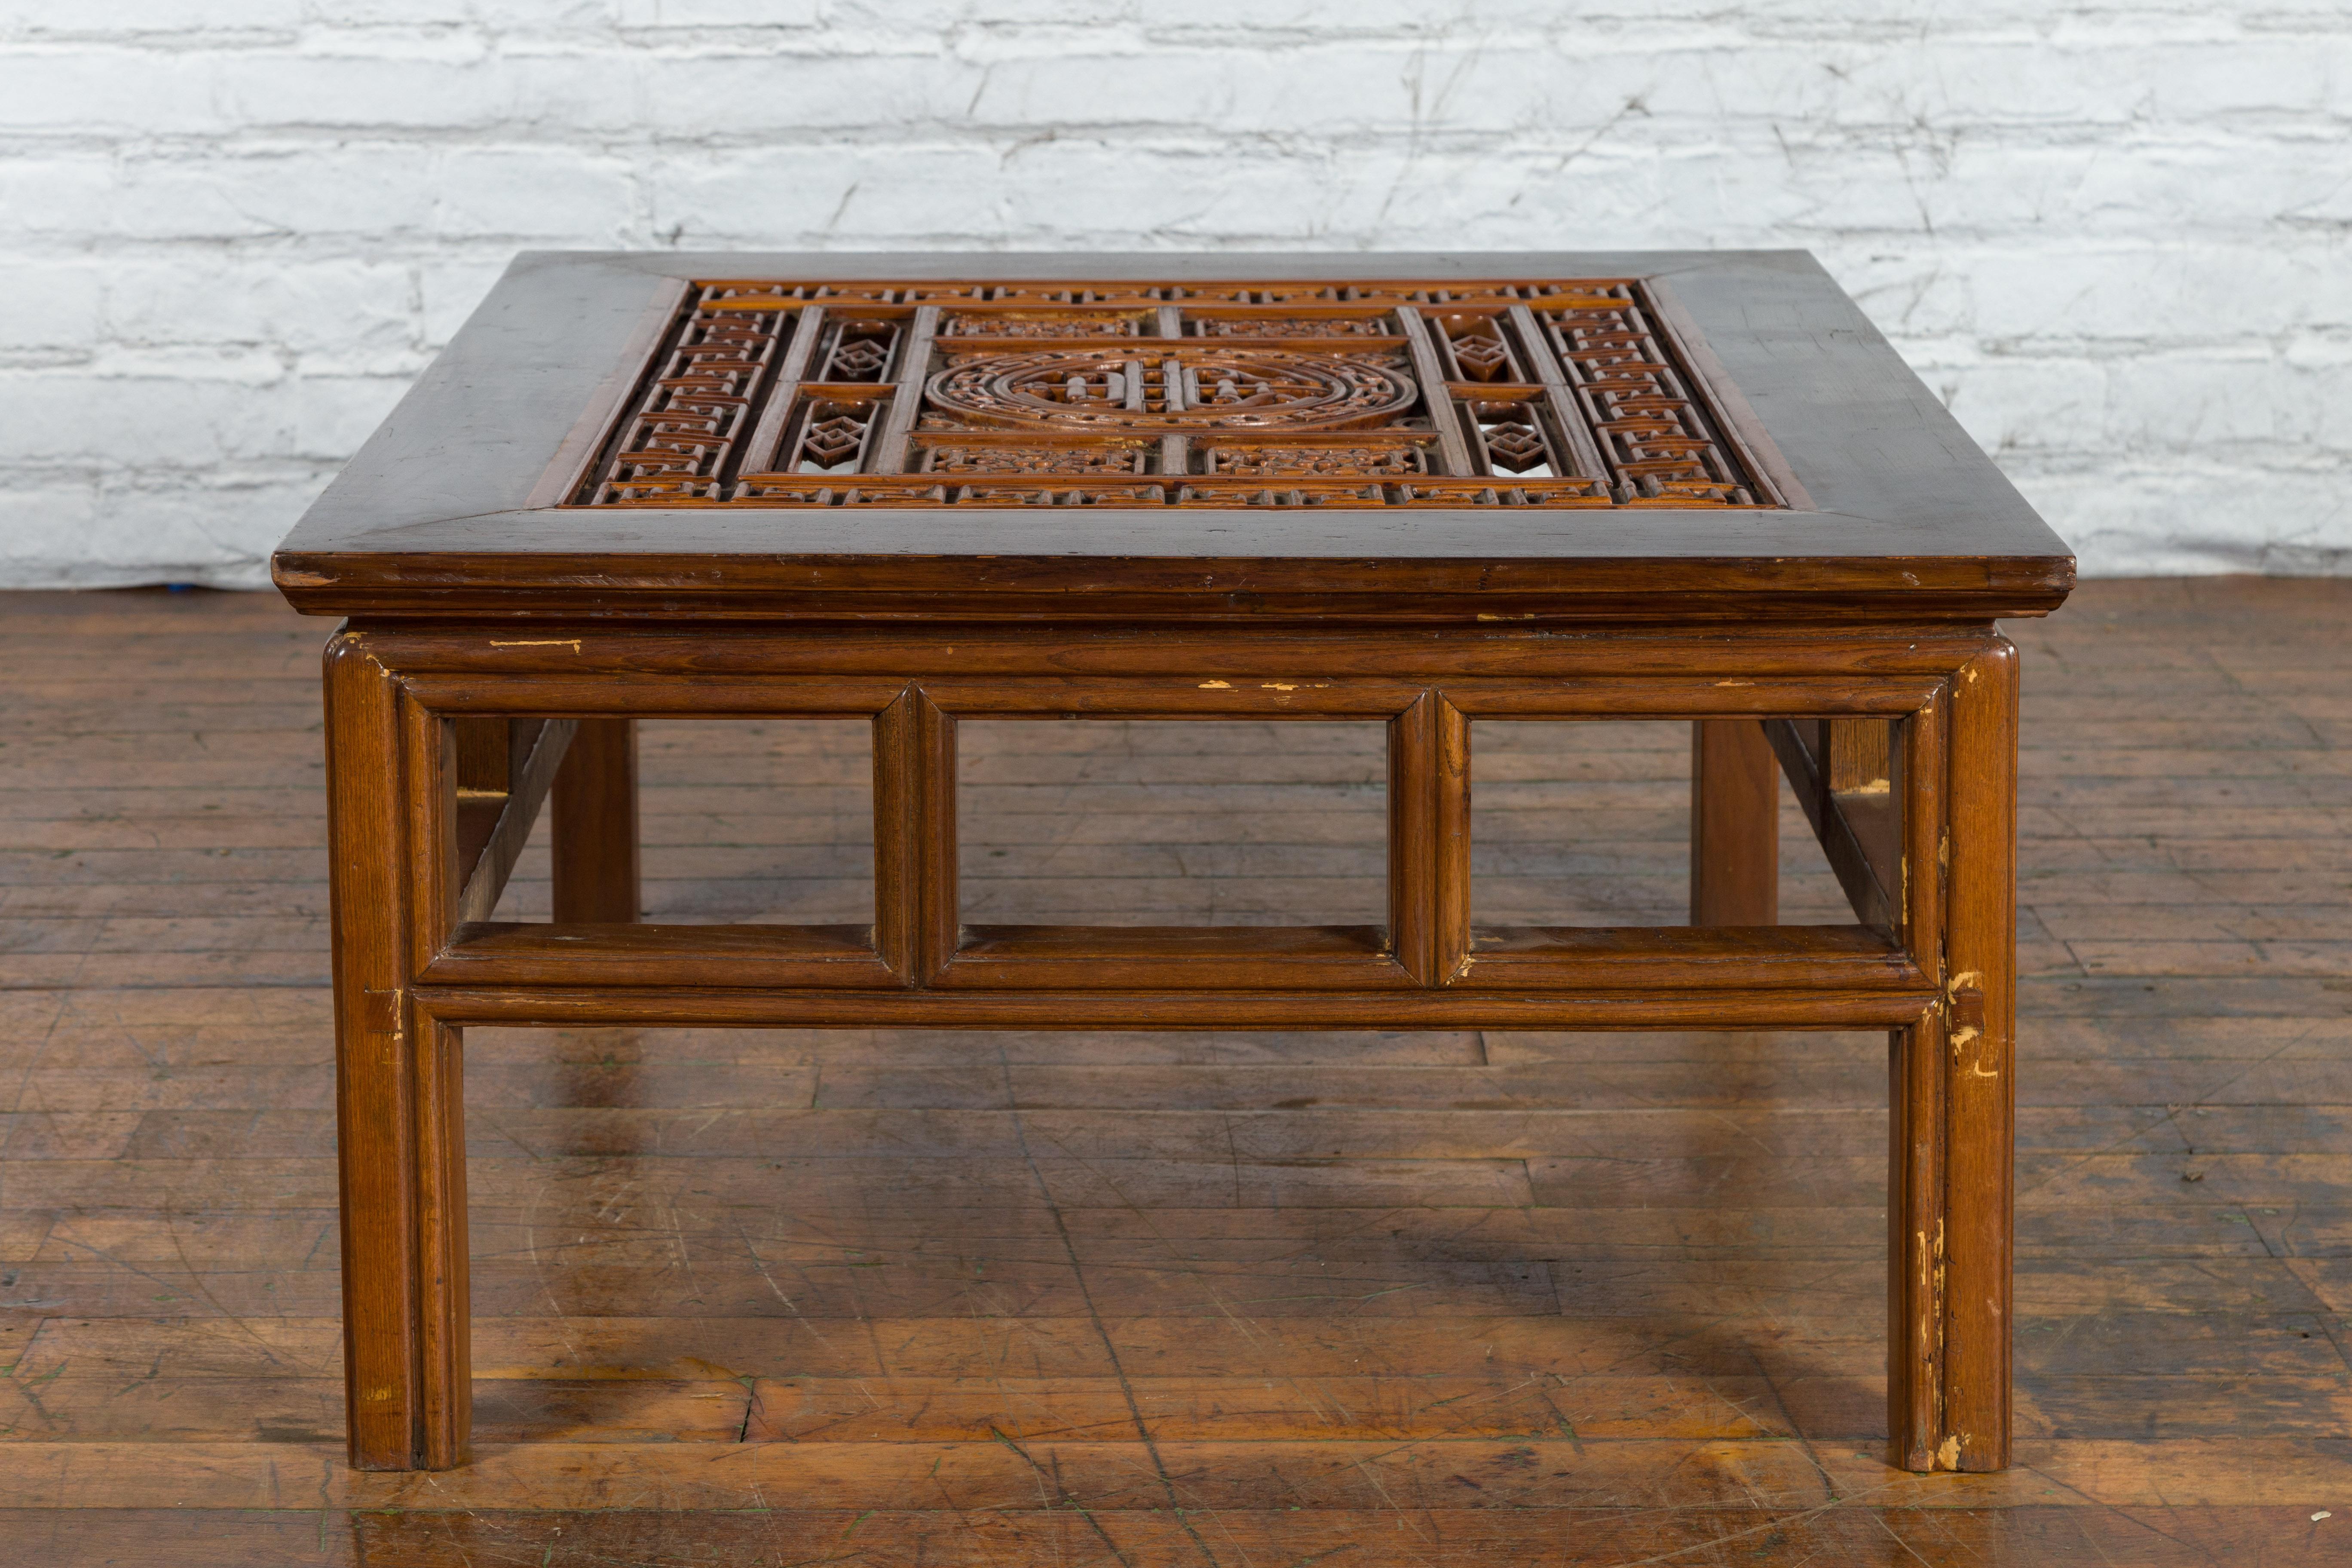 A Chinese Qing Dynasty period wooden coffee table from the 19th century with carved fretwork top, pierced apron and straight legs. Created in China during the Qing Dynasty in the 19th century, this wooden coffee table attracts immediately our